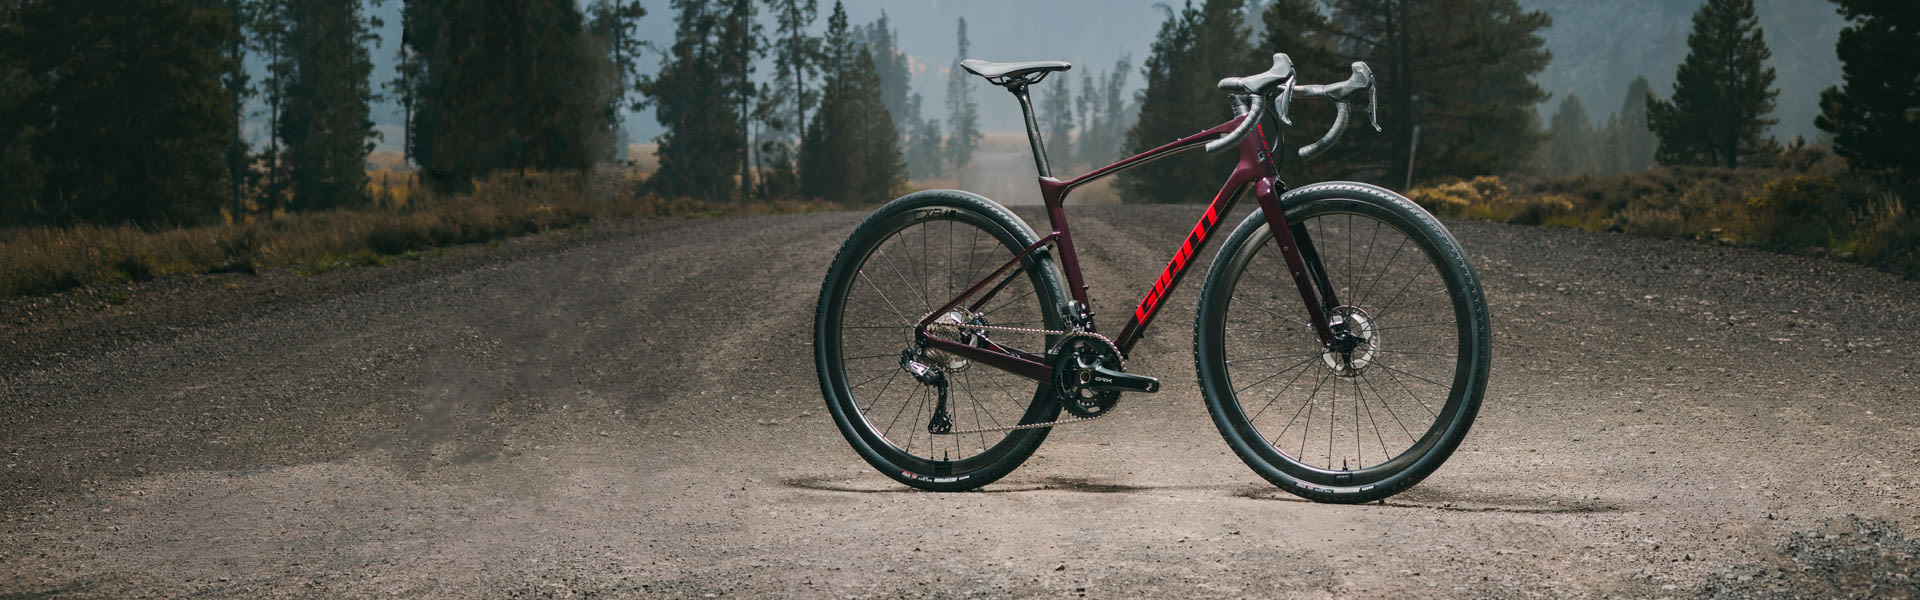 The All-New Revolt Gravel Bike | Giant Bicycles Official site